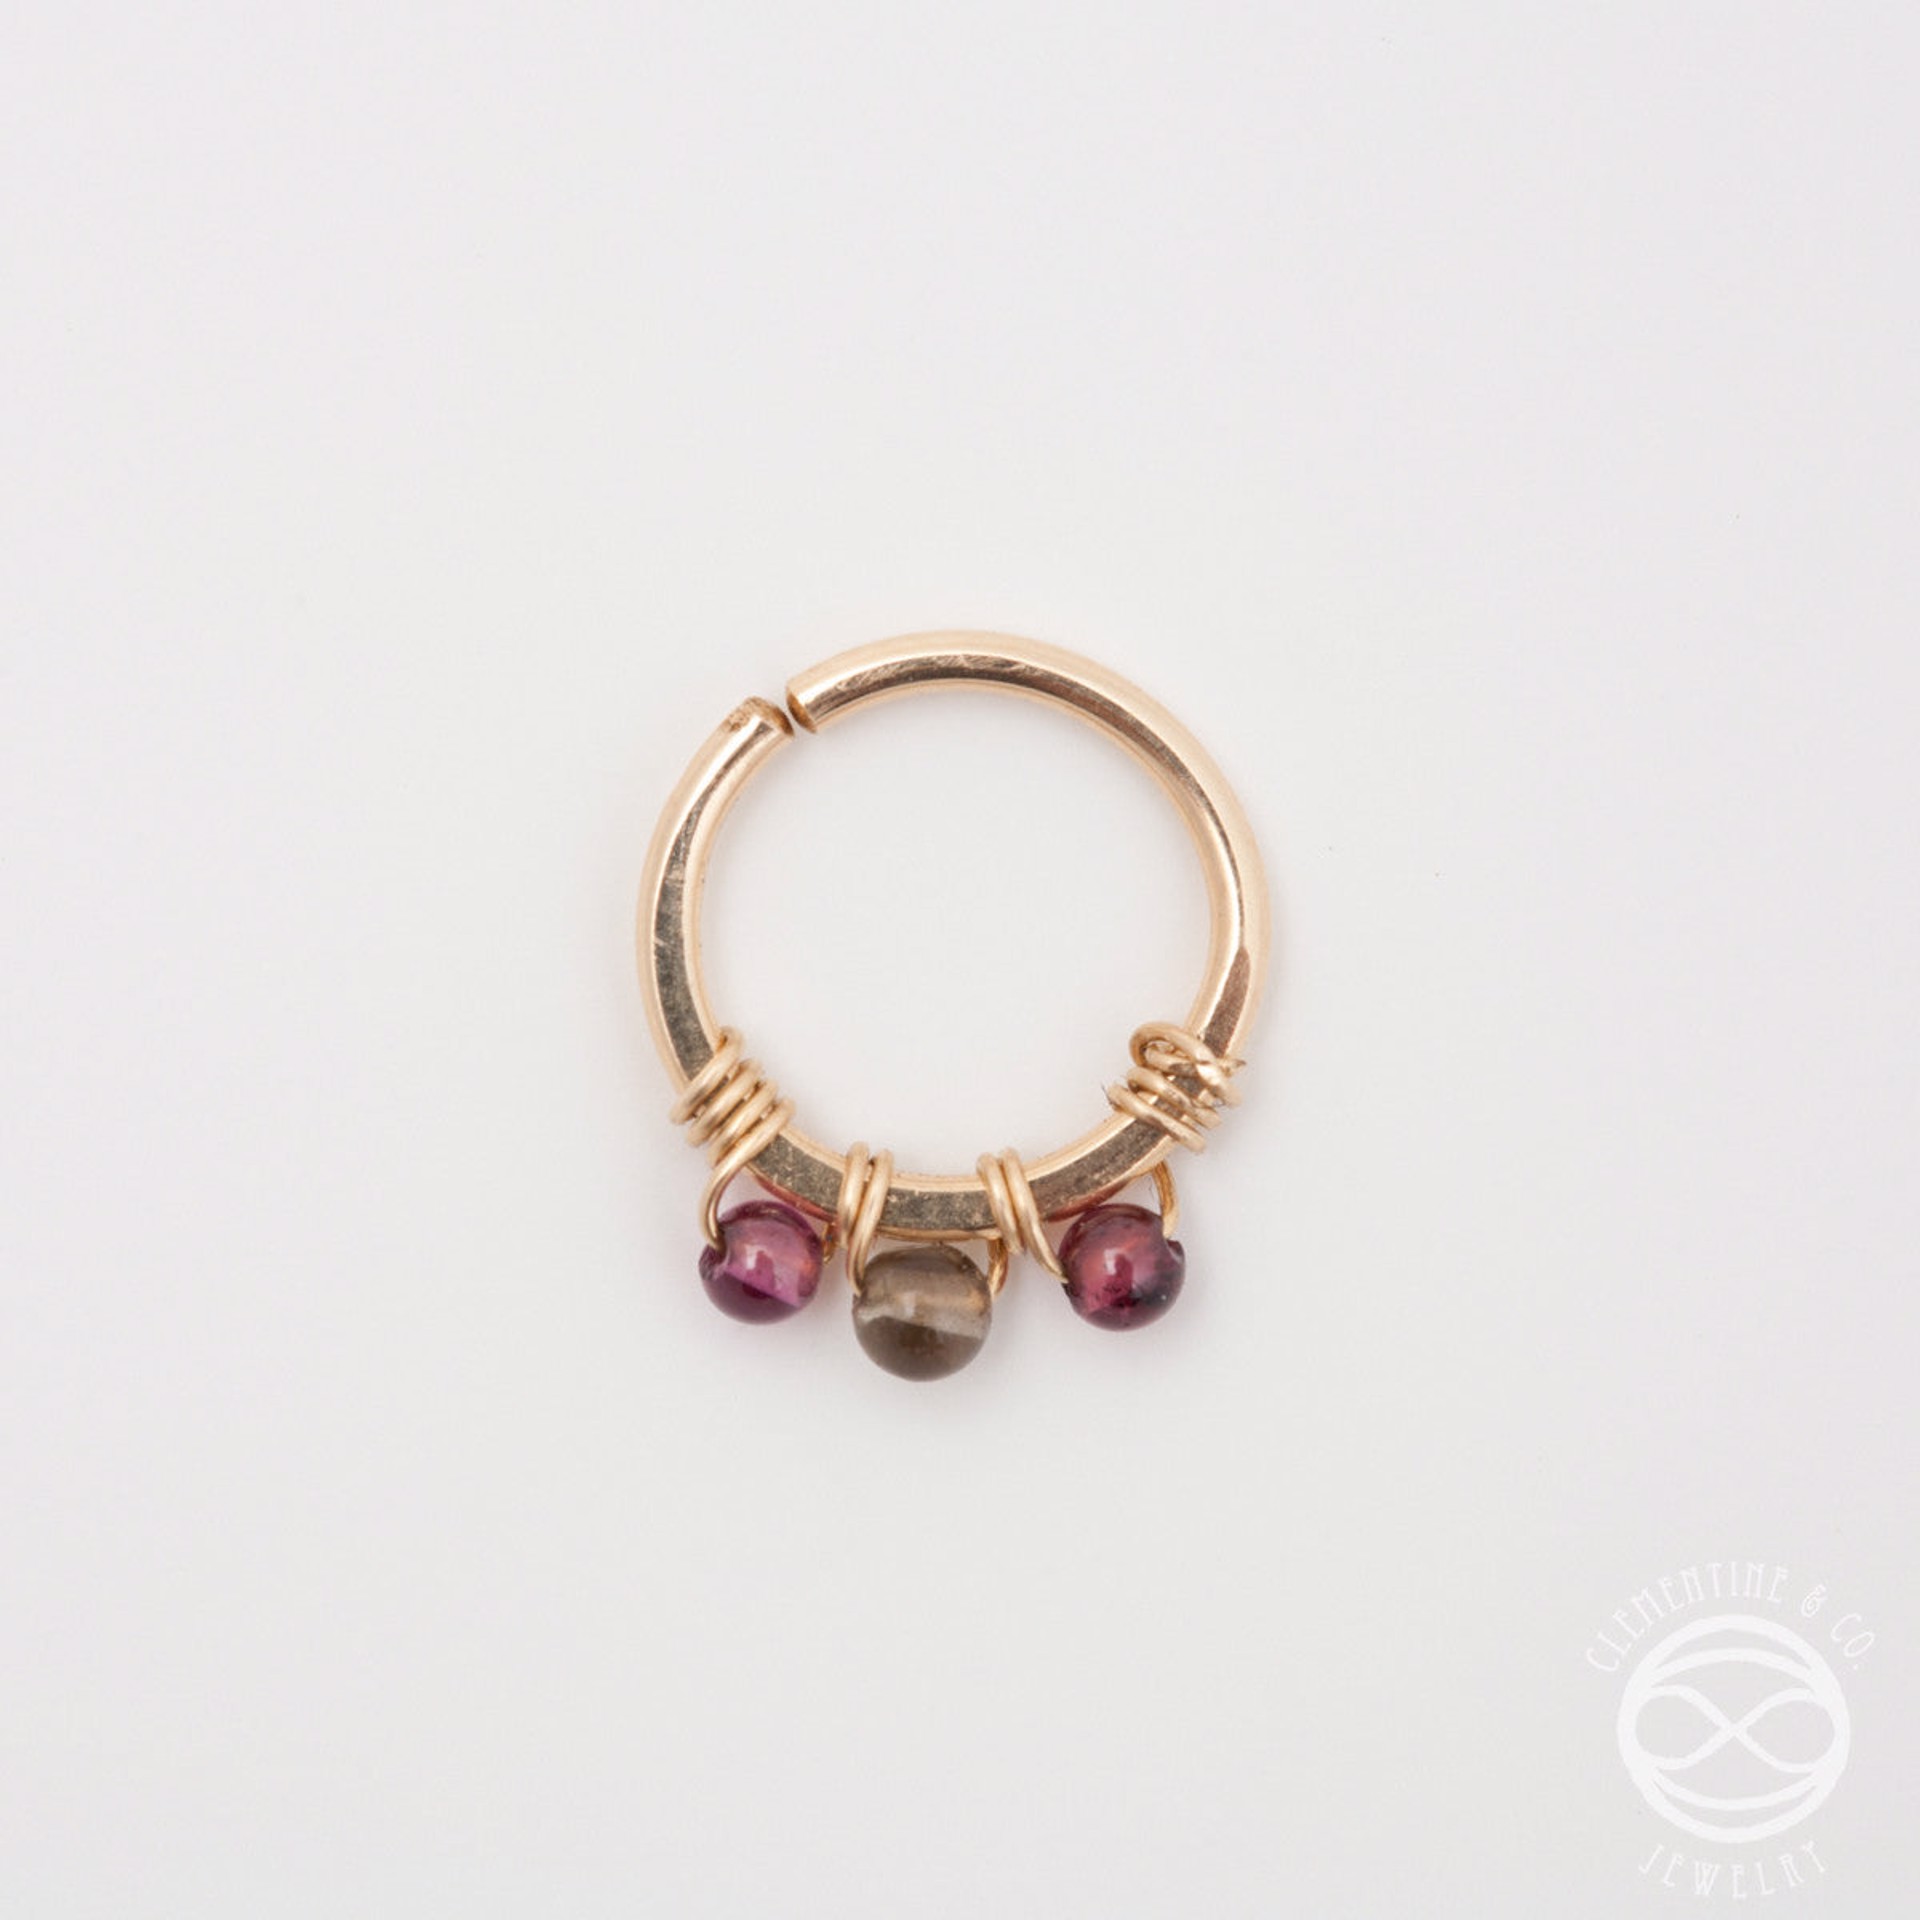 Jeweled Septum Ring in Gold - 8mm by Clementine & Co. Jewelry